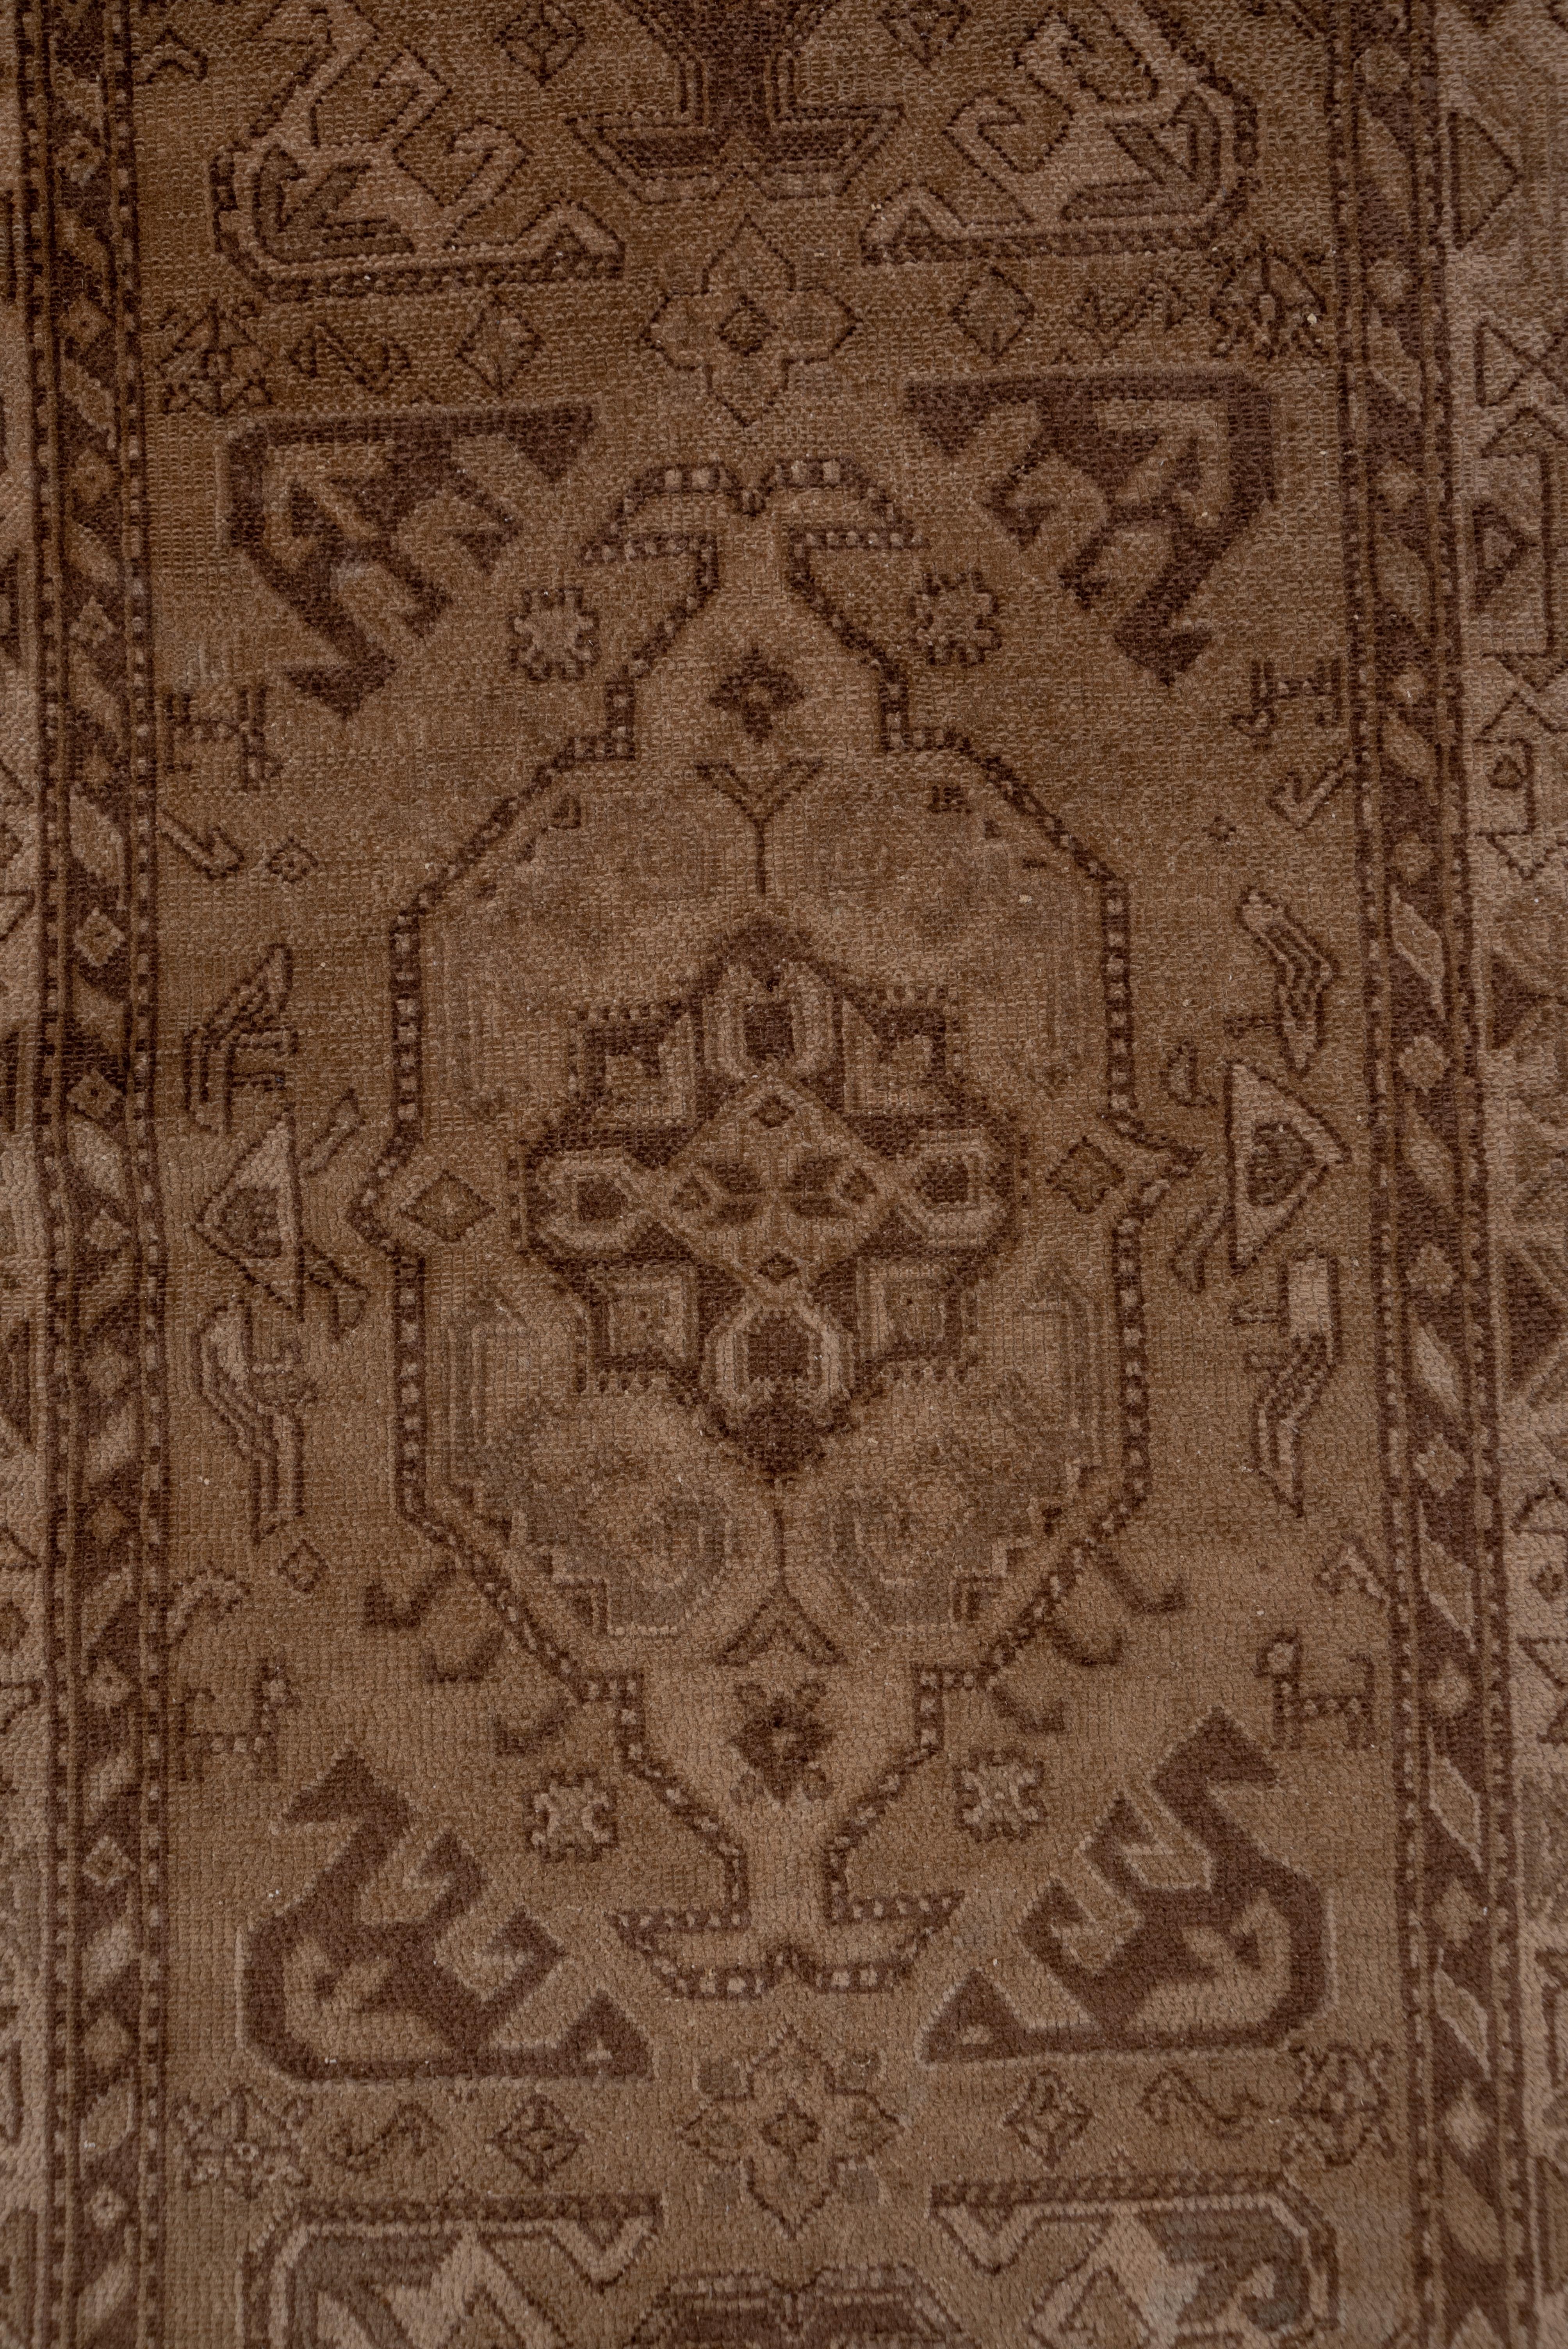 Tone on Tone Antique Brown Northwest Persian Runner, circa 1920s In Good Condition For Sale In New York, NY